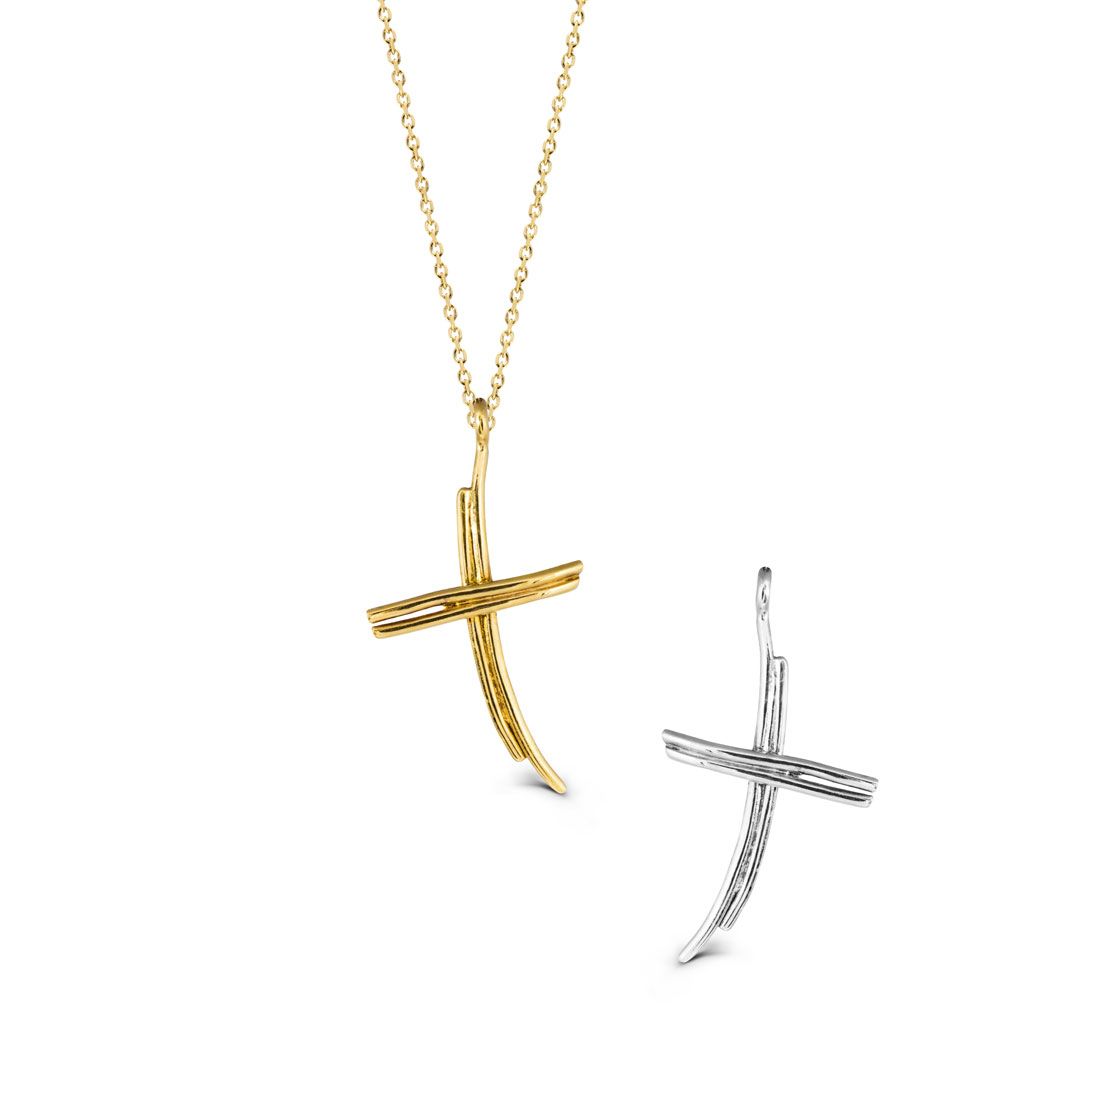 Handmade curved cross on a delicate gold chain. DIMENSIONS: 3cm x 1,5cm x0,1cm